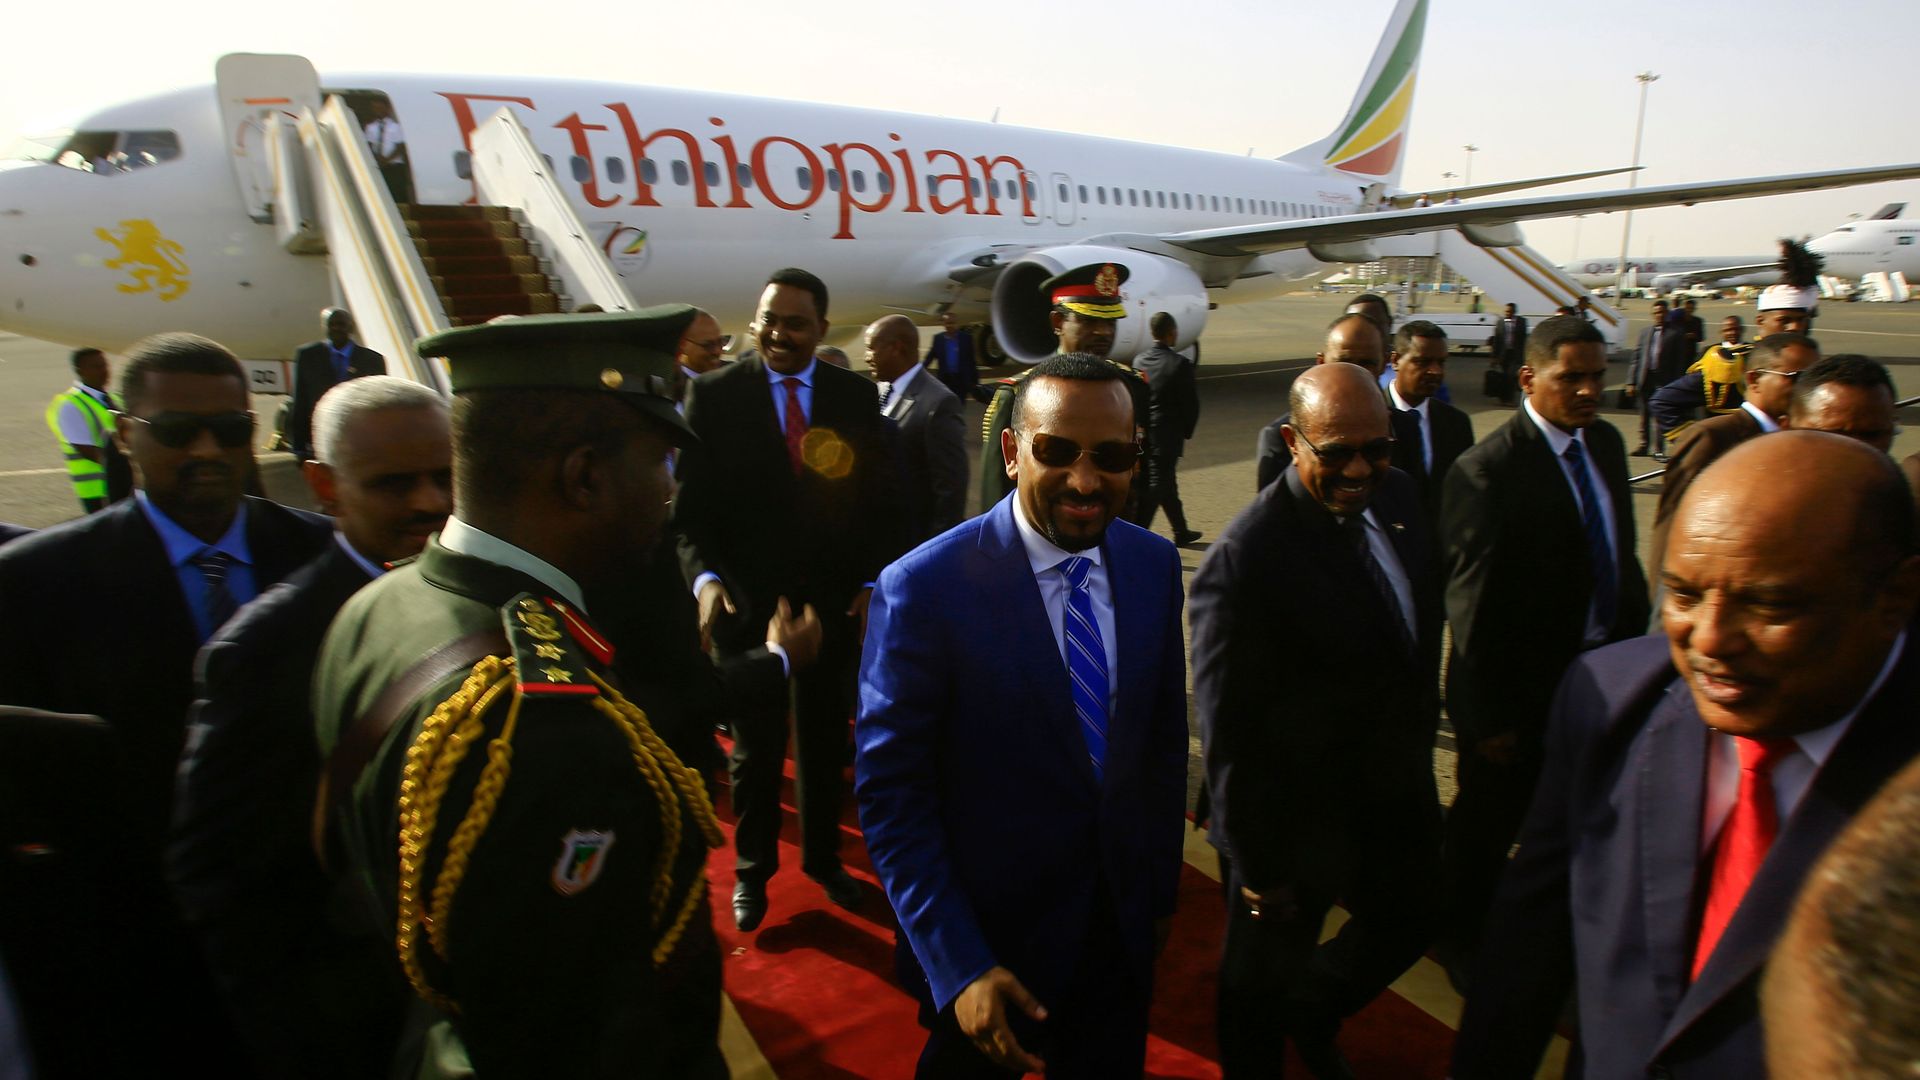 Ethiopian Prime Minister Abiy Ahmed is welcomed by Sudanese President Omar al-Bashir following his arrival in Khartoum for an official visit to Sudan on May 2, 2018.